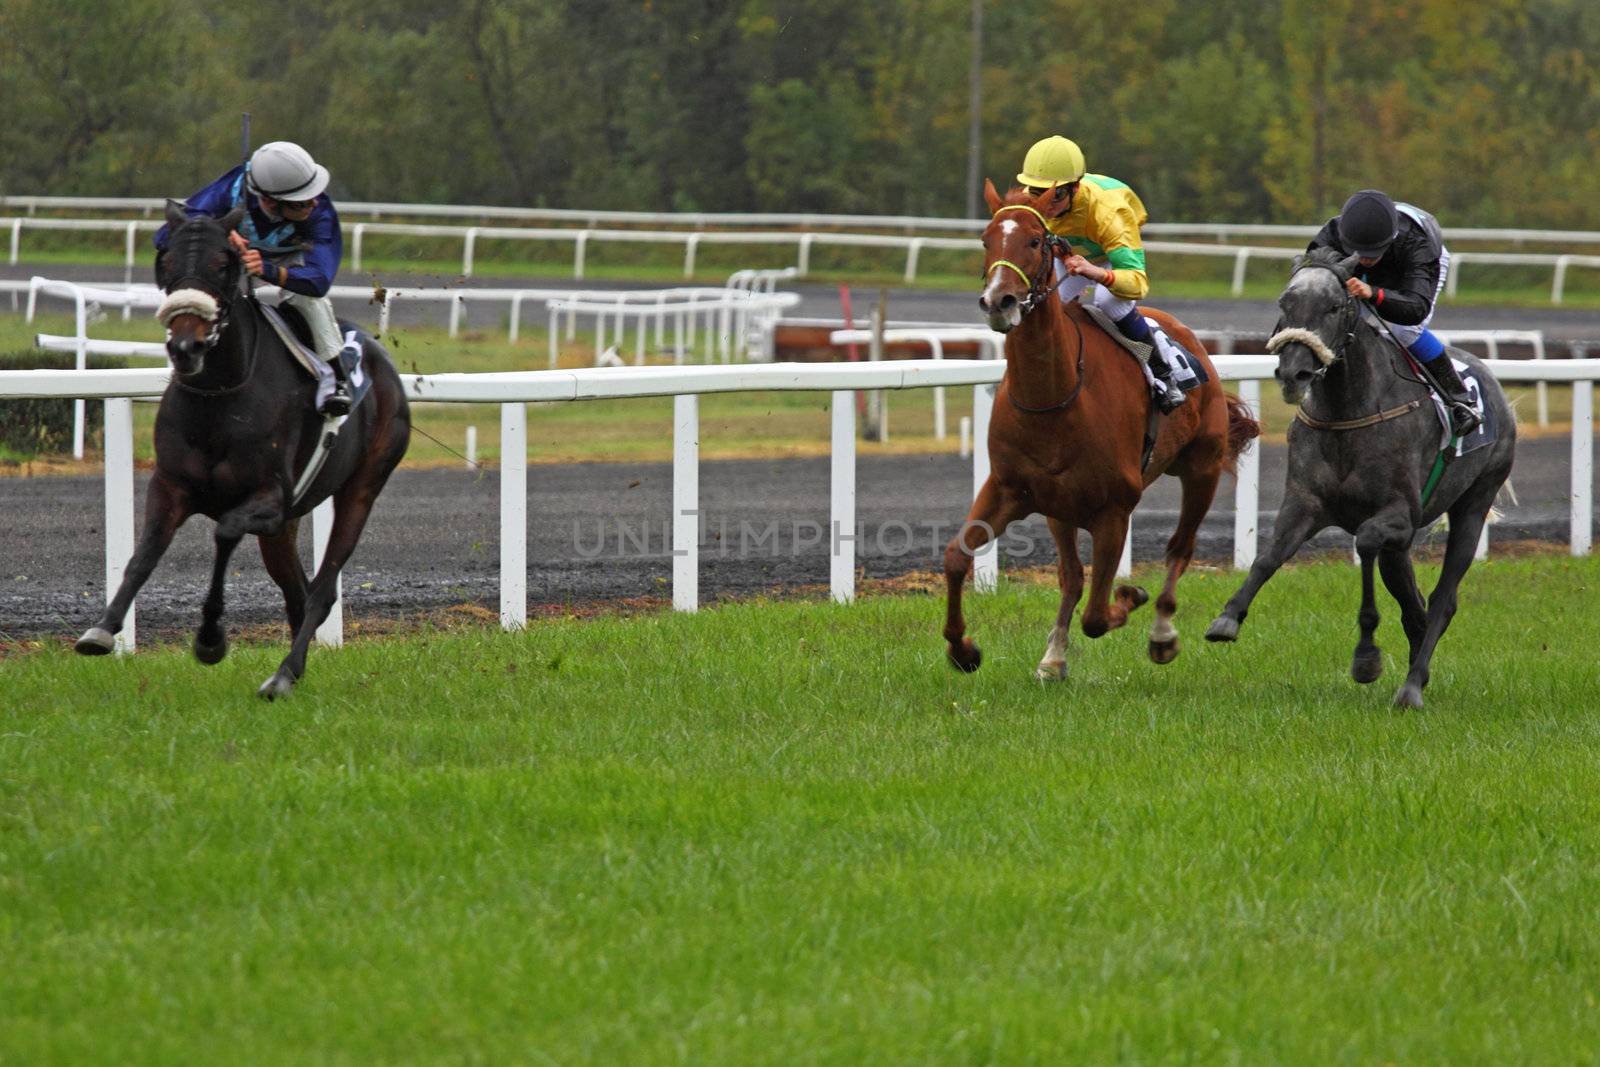 CASTERA-VERDUZAN, FRANCE - OCTOBER 4: The leader watches his rivals as they  sprint up the home straight in a race at the Baron hippodrome Castera Verduzan, France on October 4, 2010